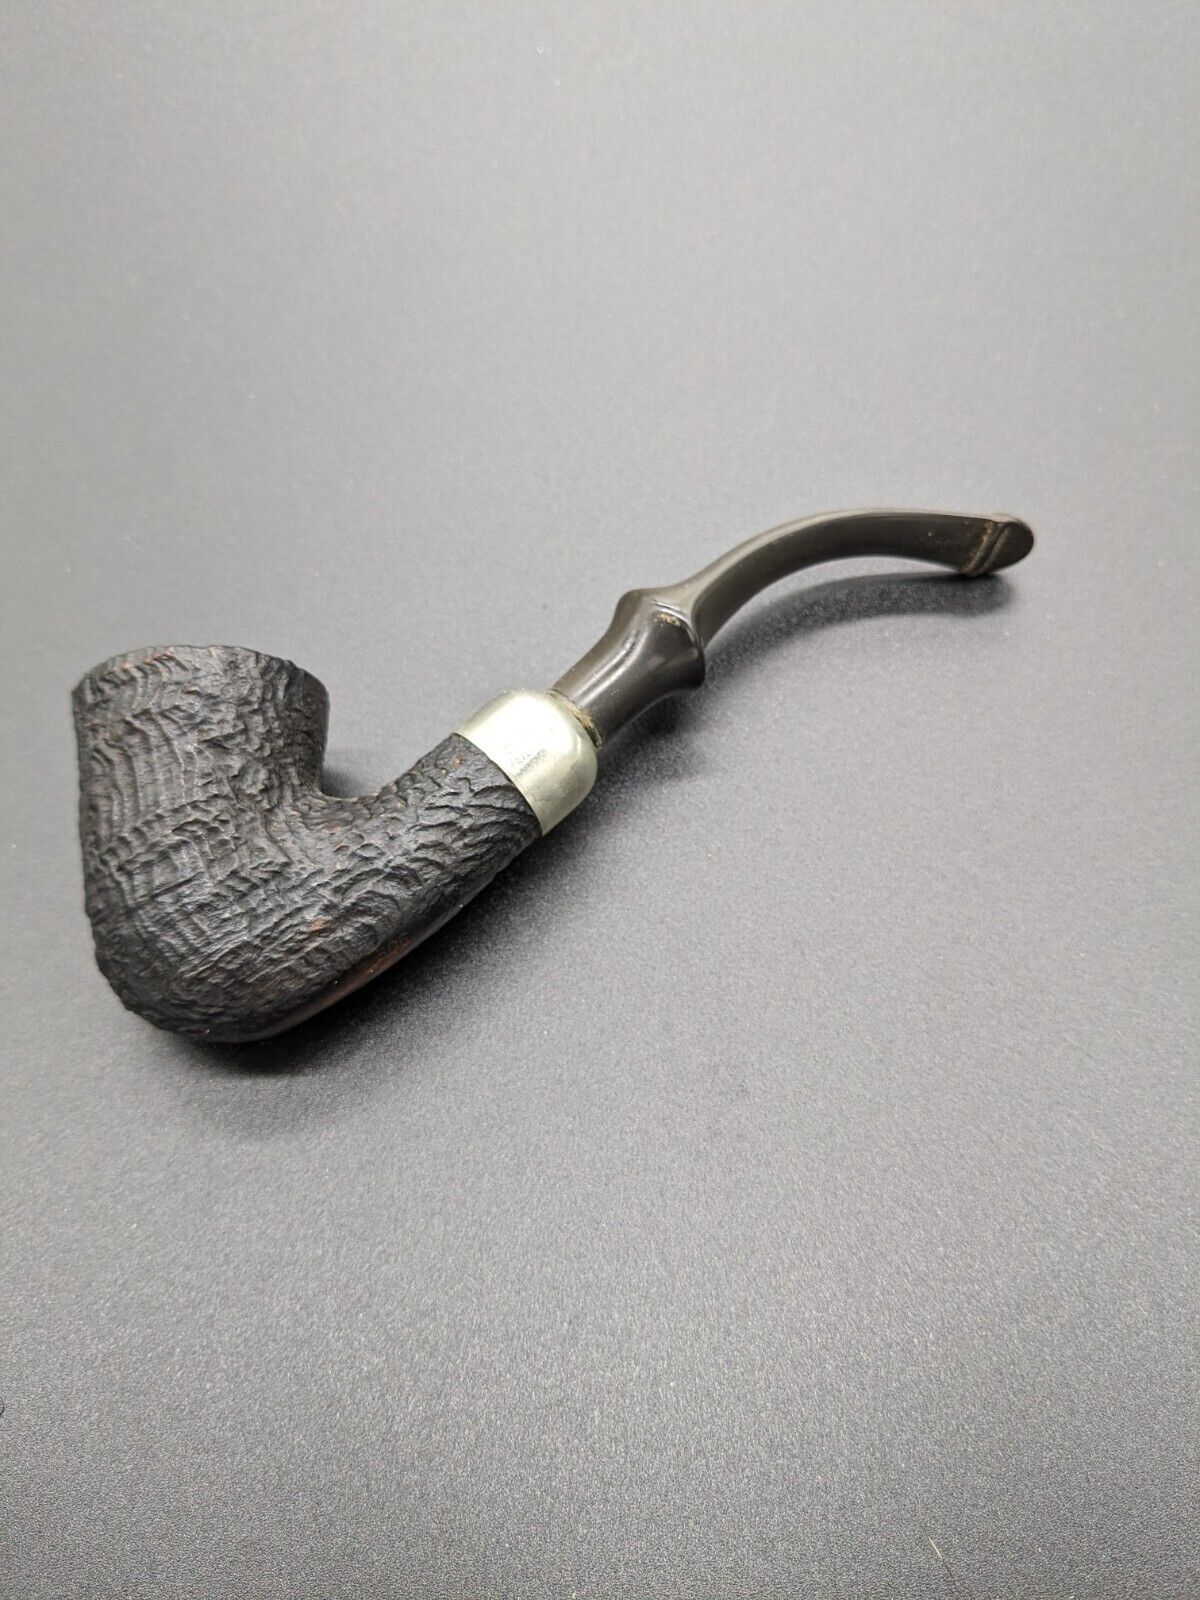 Vintage Peterson 305 System Standard Tobacco Pipe P-Lip